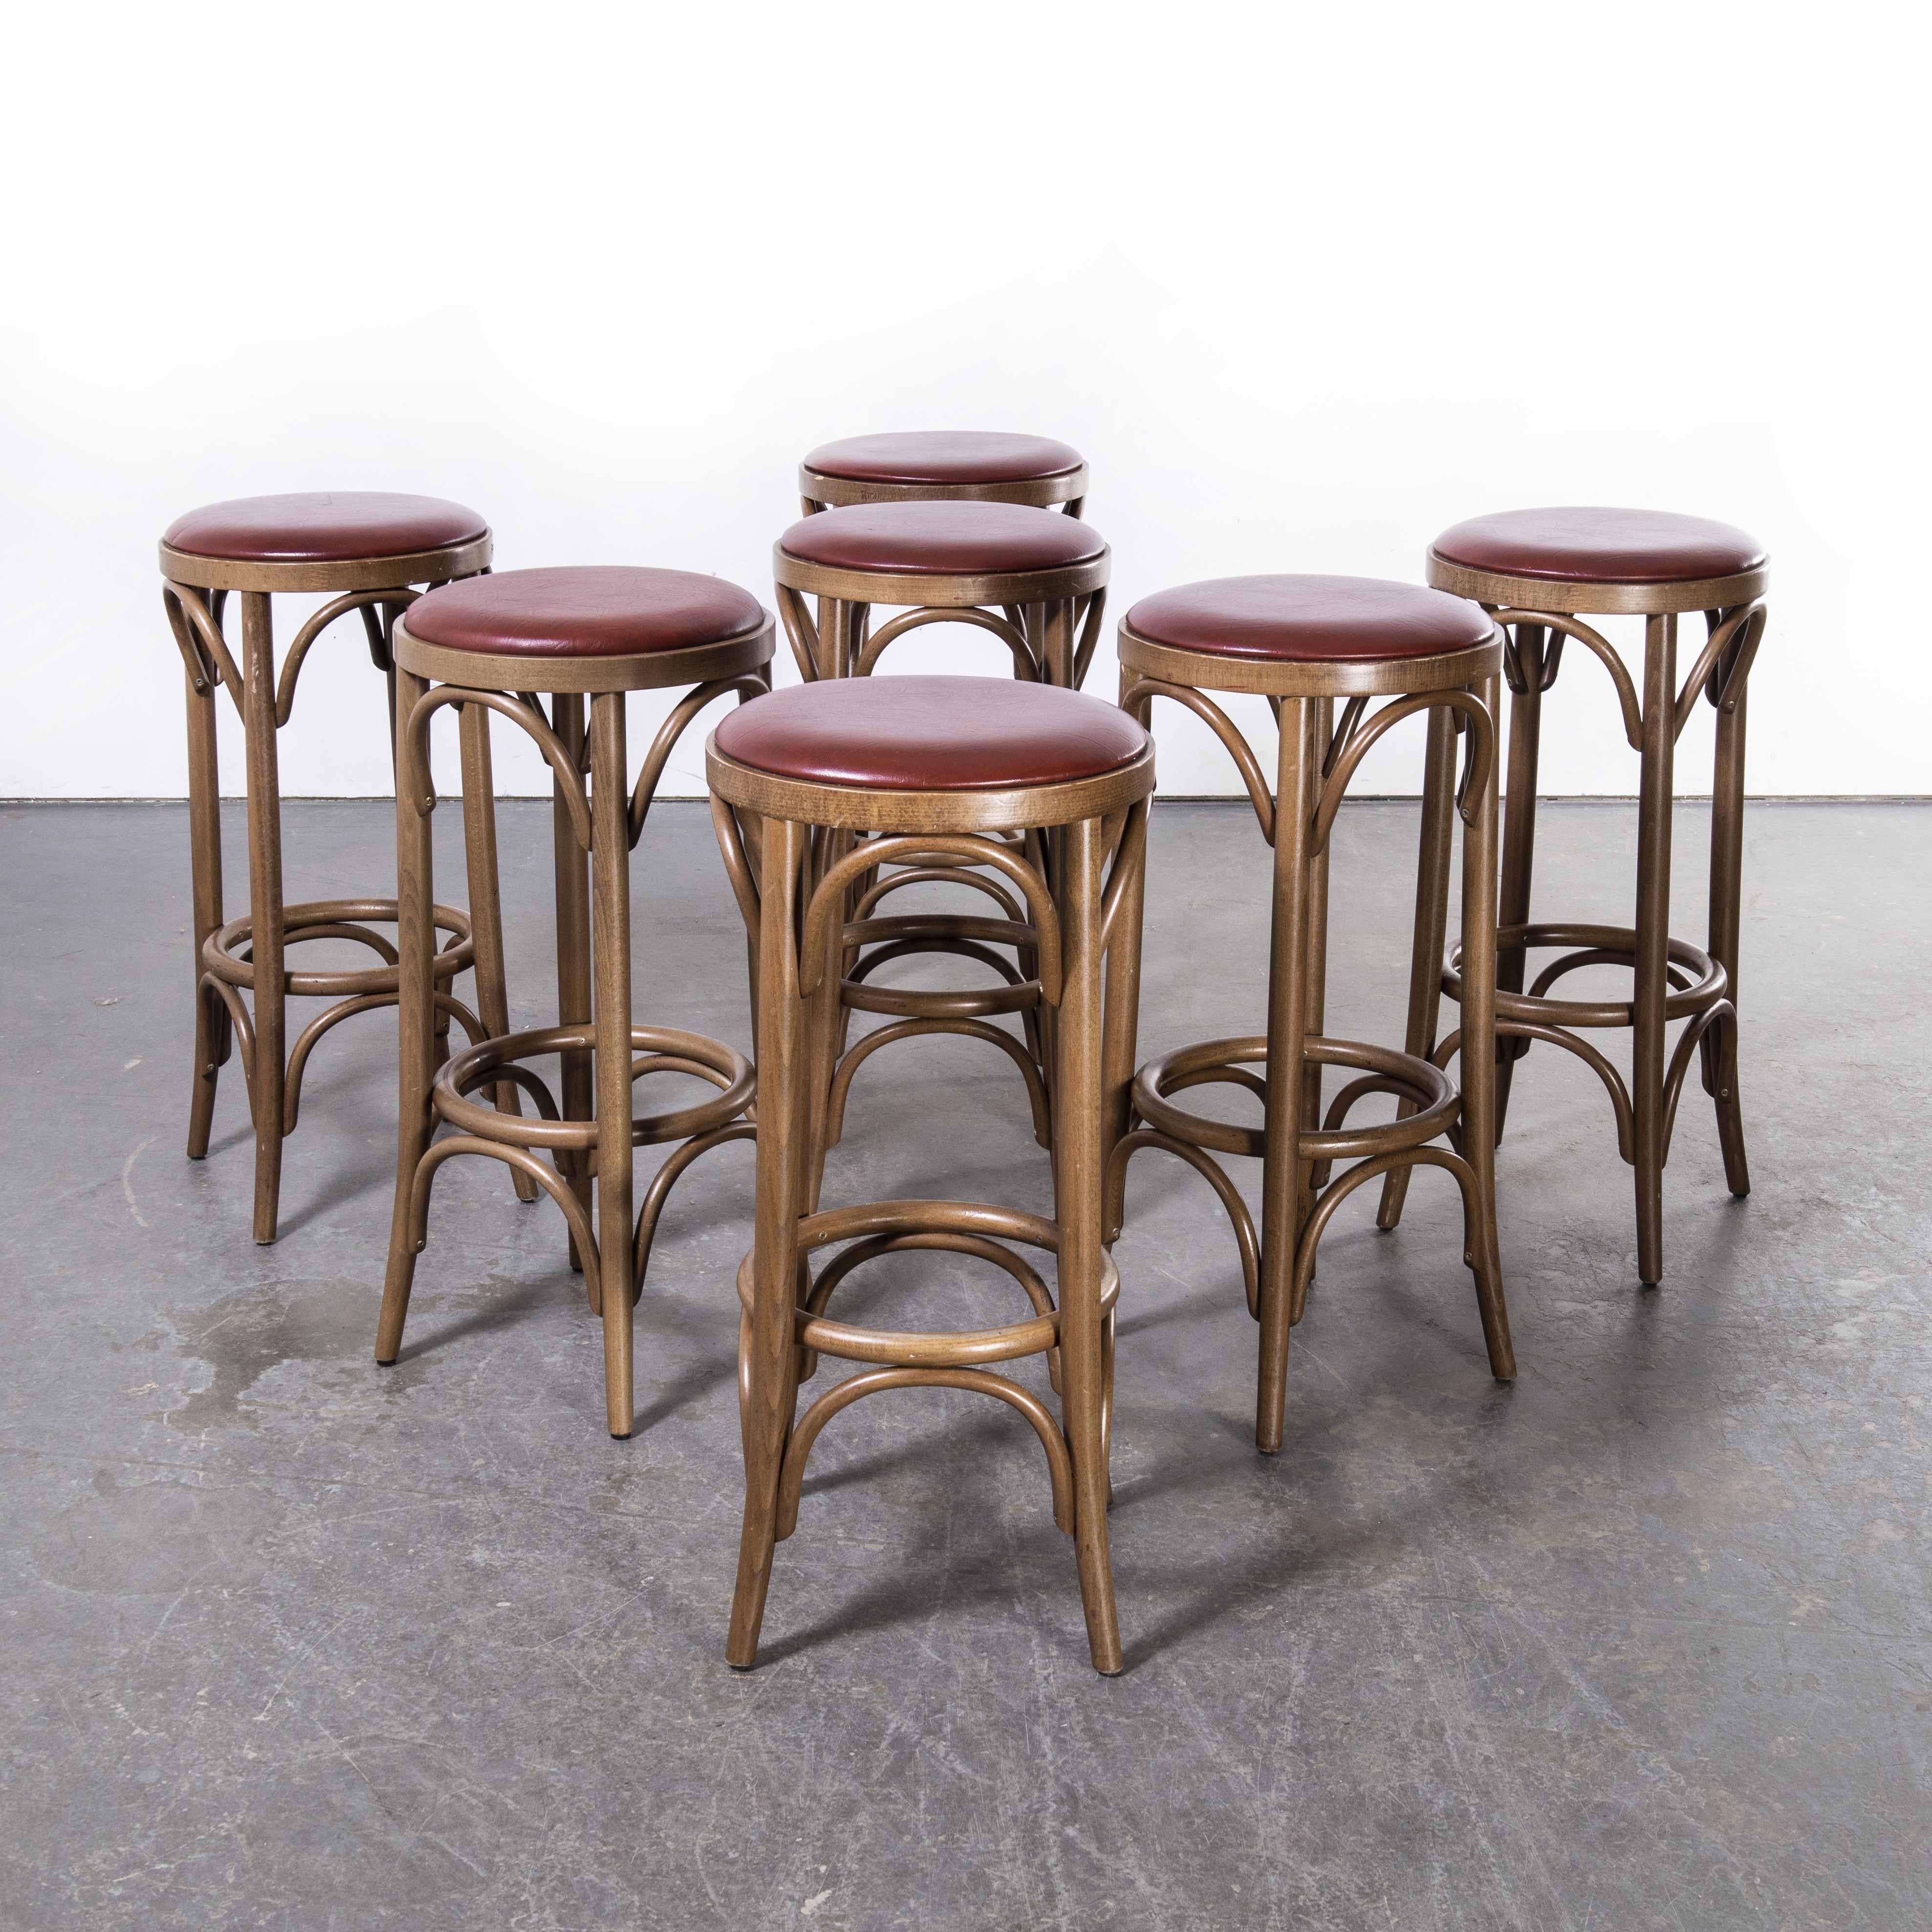 1970’s walnut bentwood upholstered Barstools – set of seven
1970’s walnut bentwood upholstered Barstools – set of seven. These stools were produced by the famous Czech firm Ton, still trading today and producing beautiful furniture, they are an